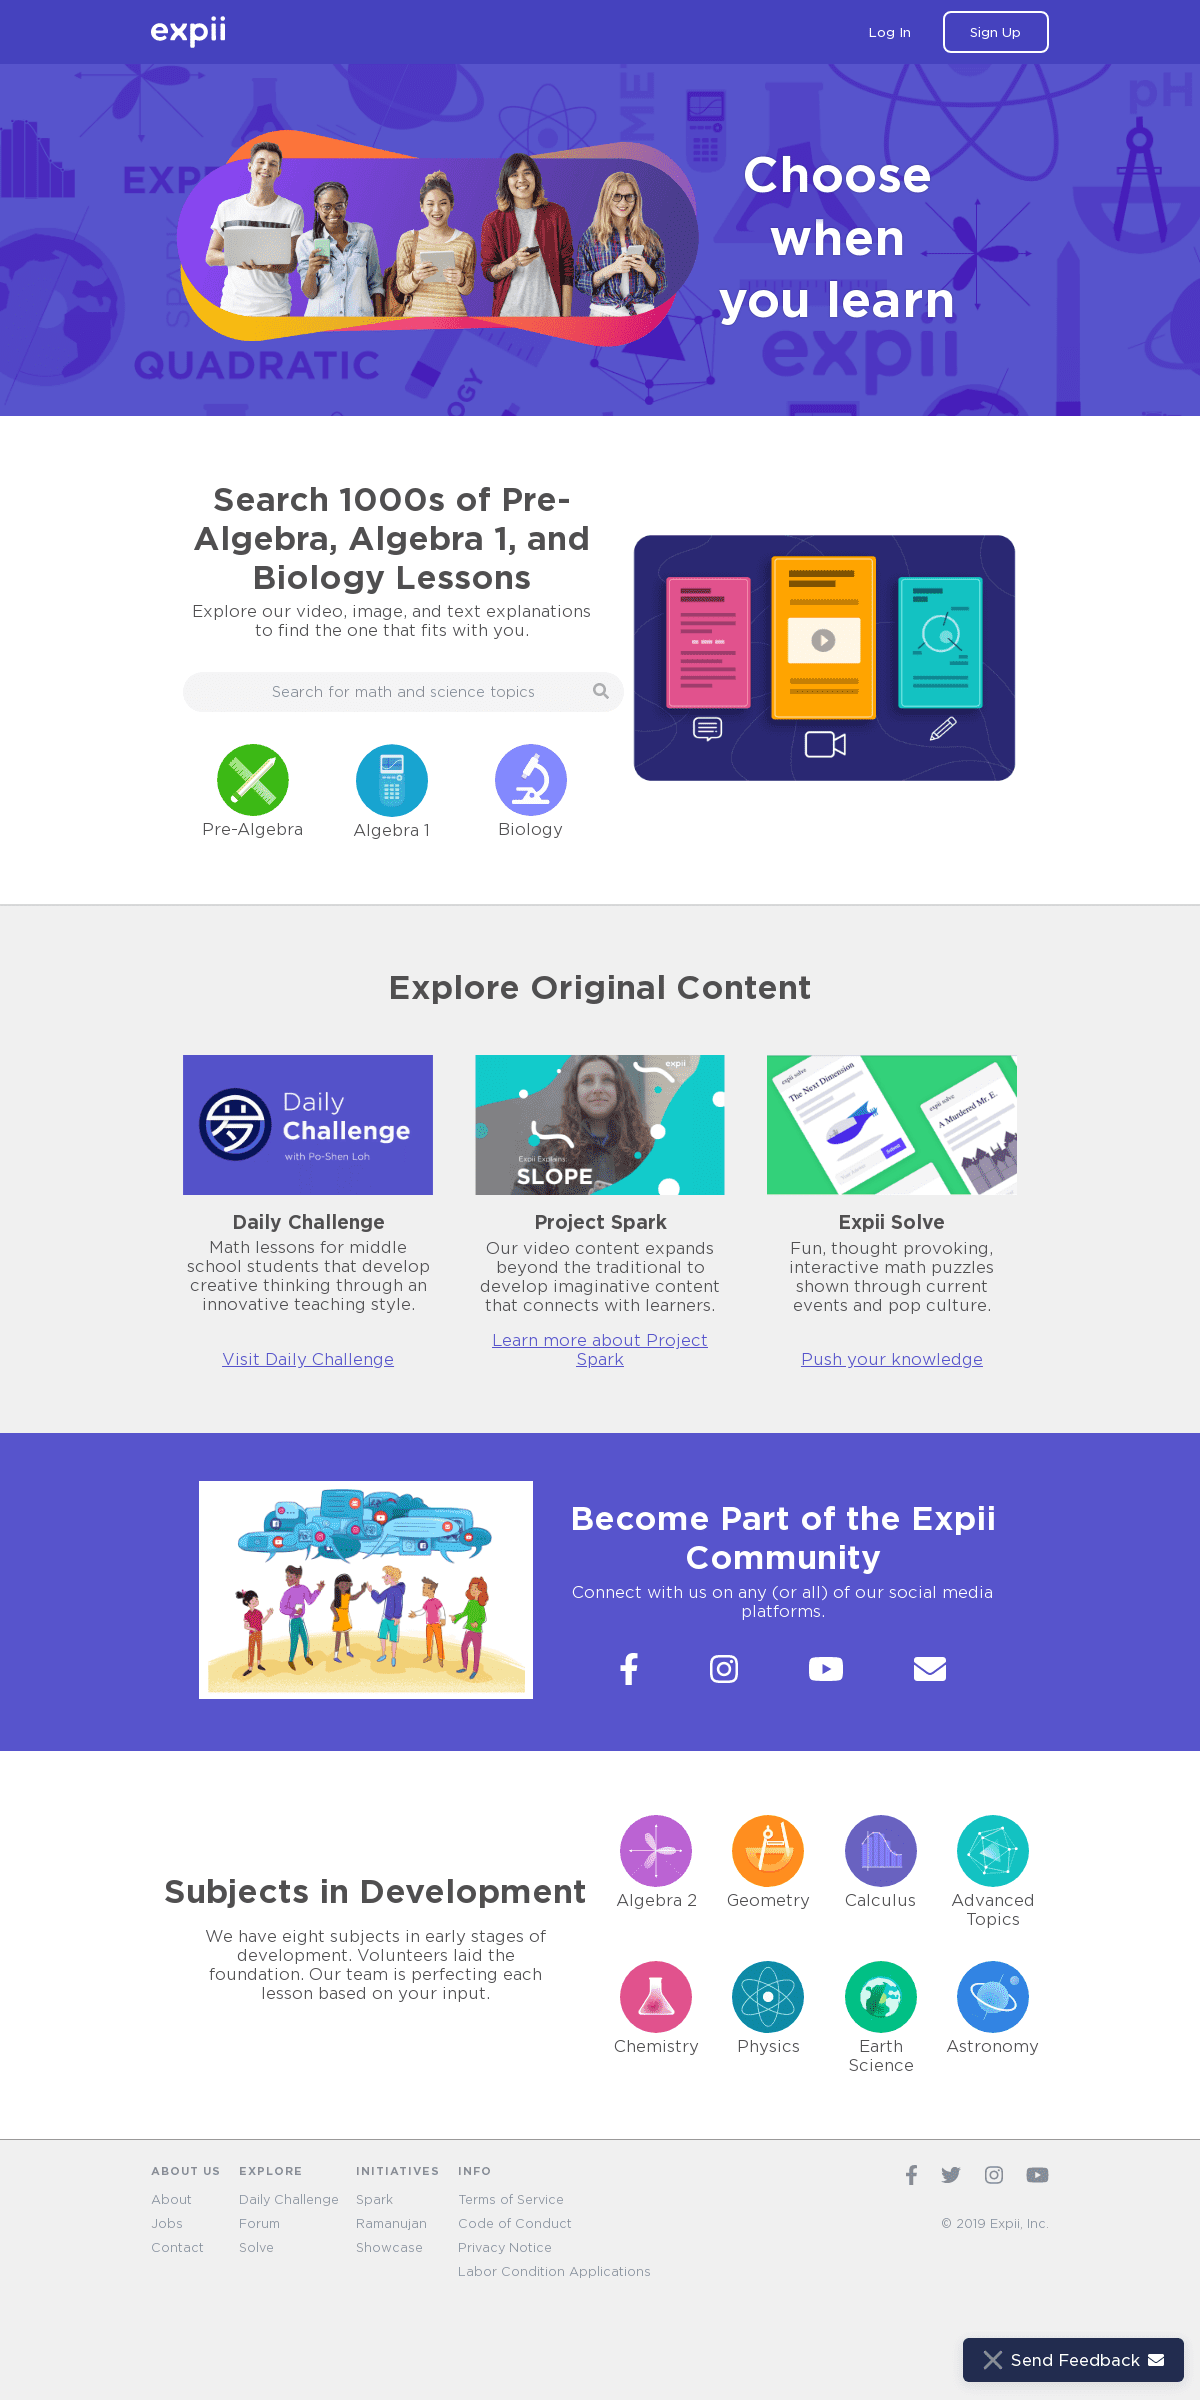 A complete backup of expii.com